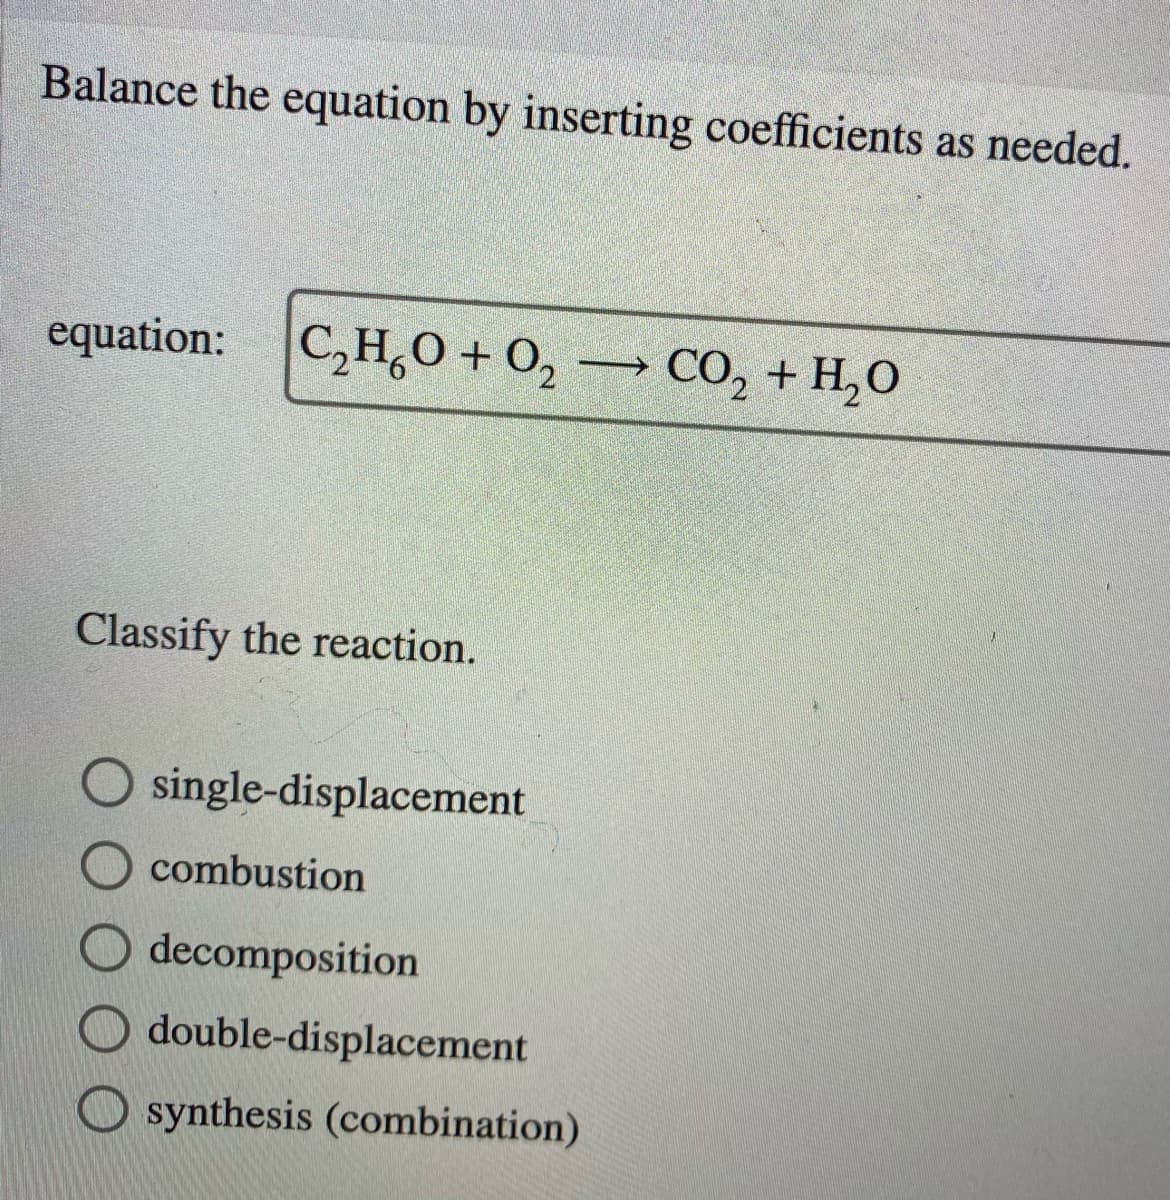 Balance the equation by inserting coefficients as needed.
equation:
C,H,0 + 0, → CO, + H,O
Classify the reaction.
single-displacement
combustion
decomposition
double-displacement
synthesis (combination)
